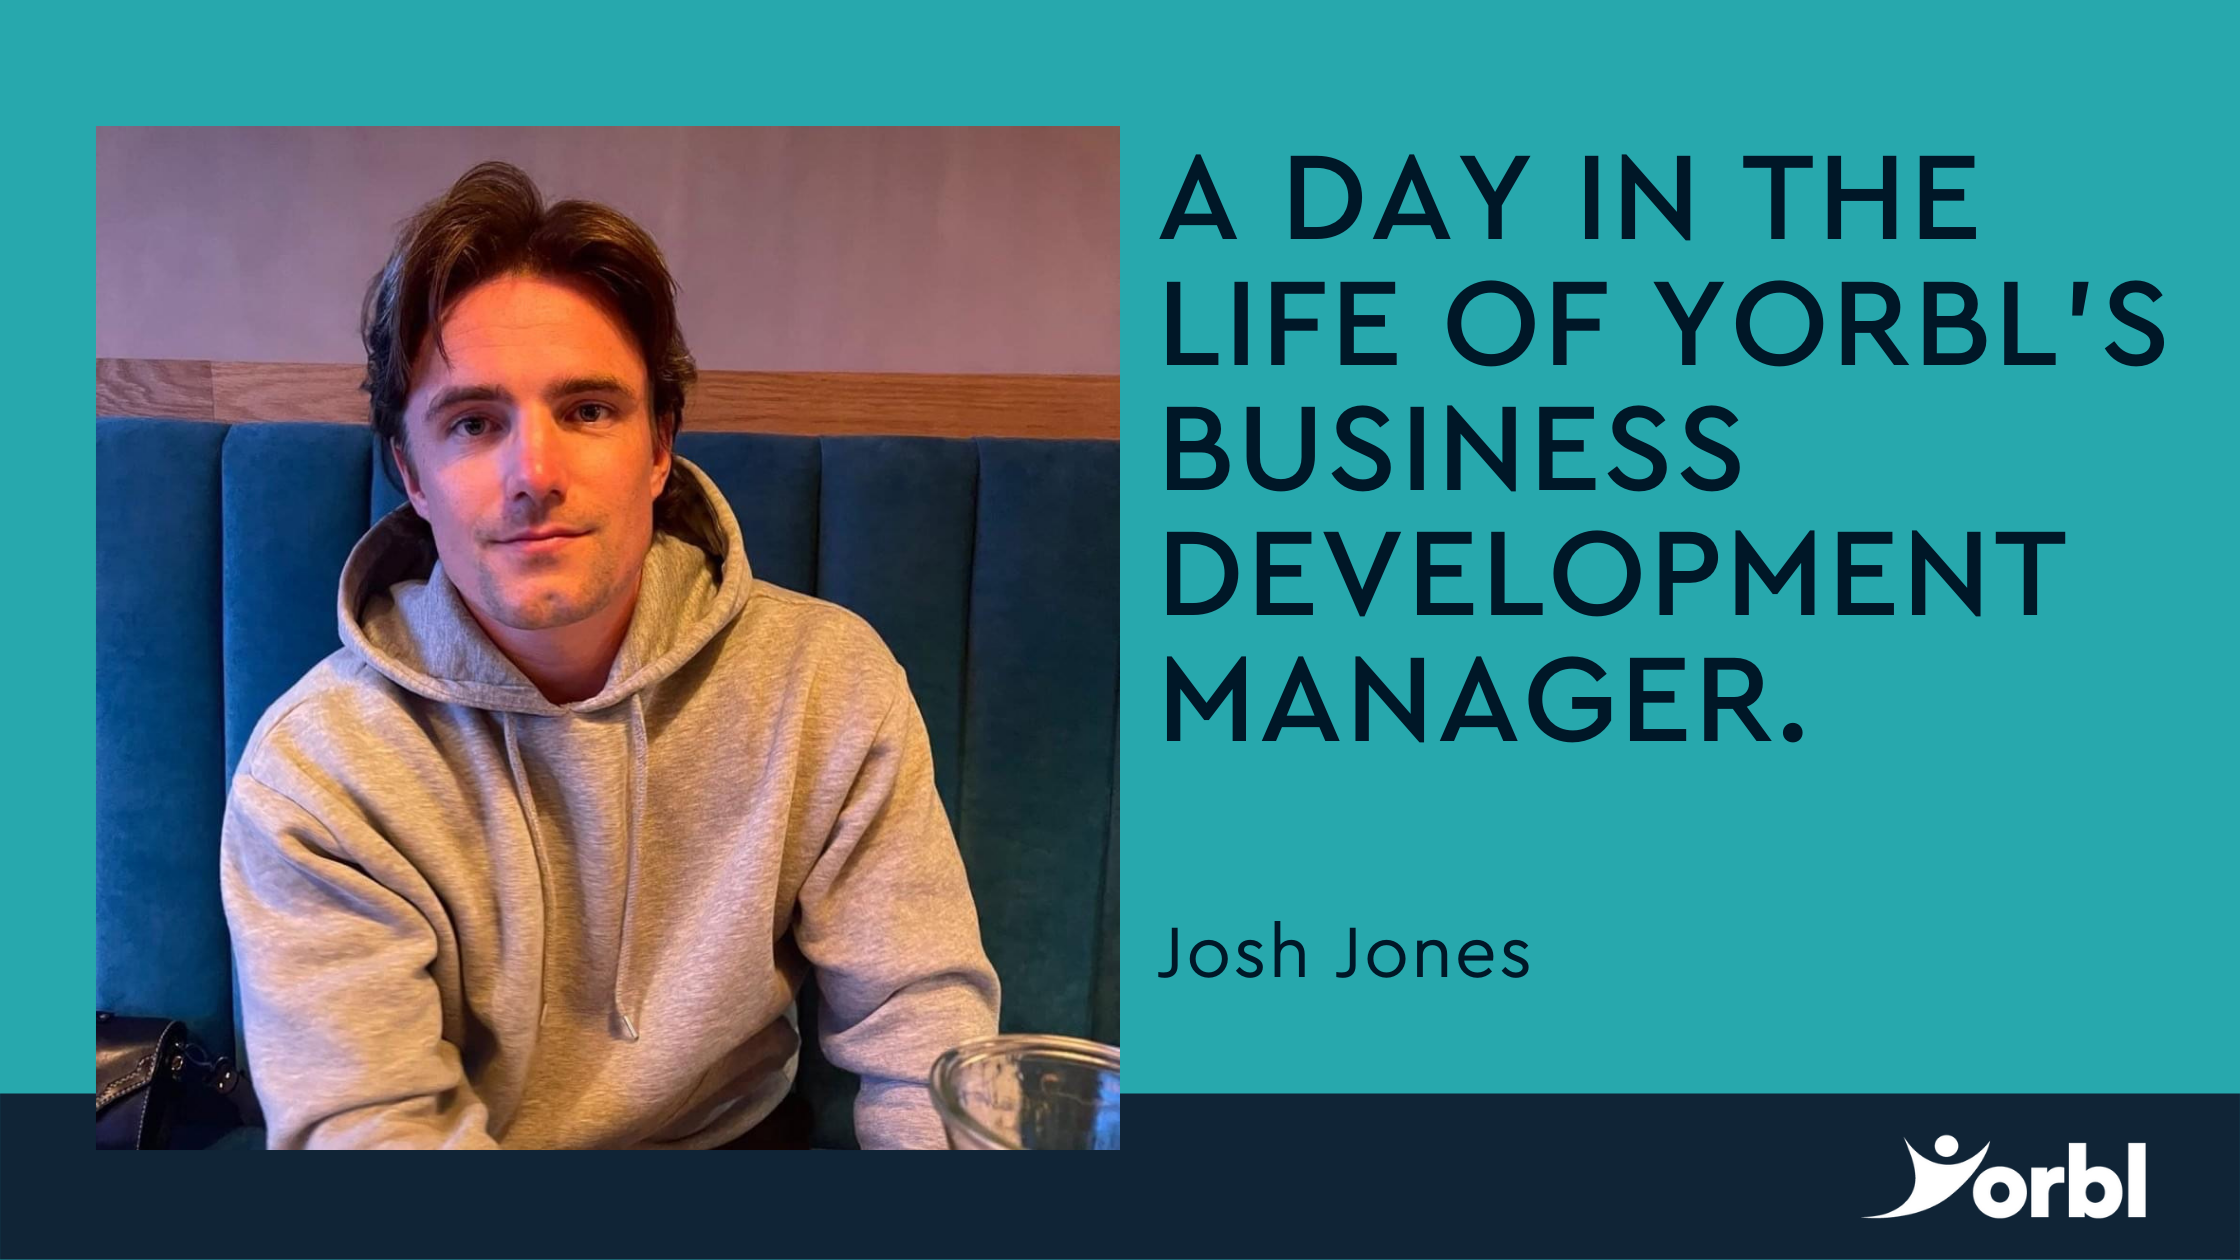 A day in the life Josh Jones image on blue background with the text "a day in the life of Yorbl's business development manager" and the Yorbl logo in bottom right